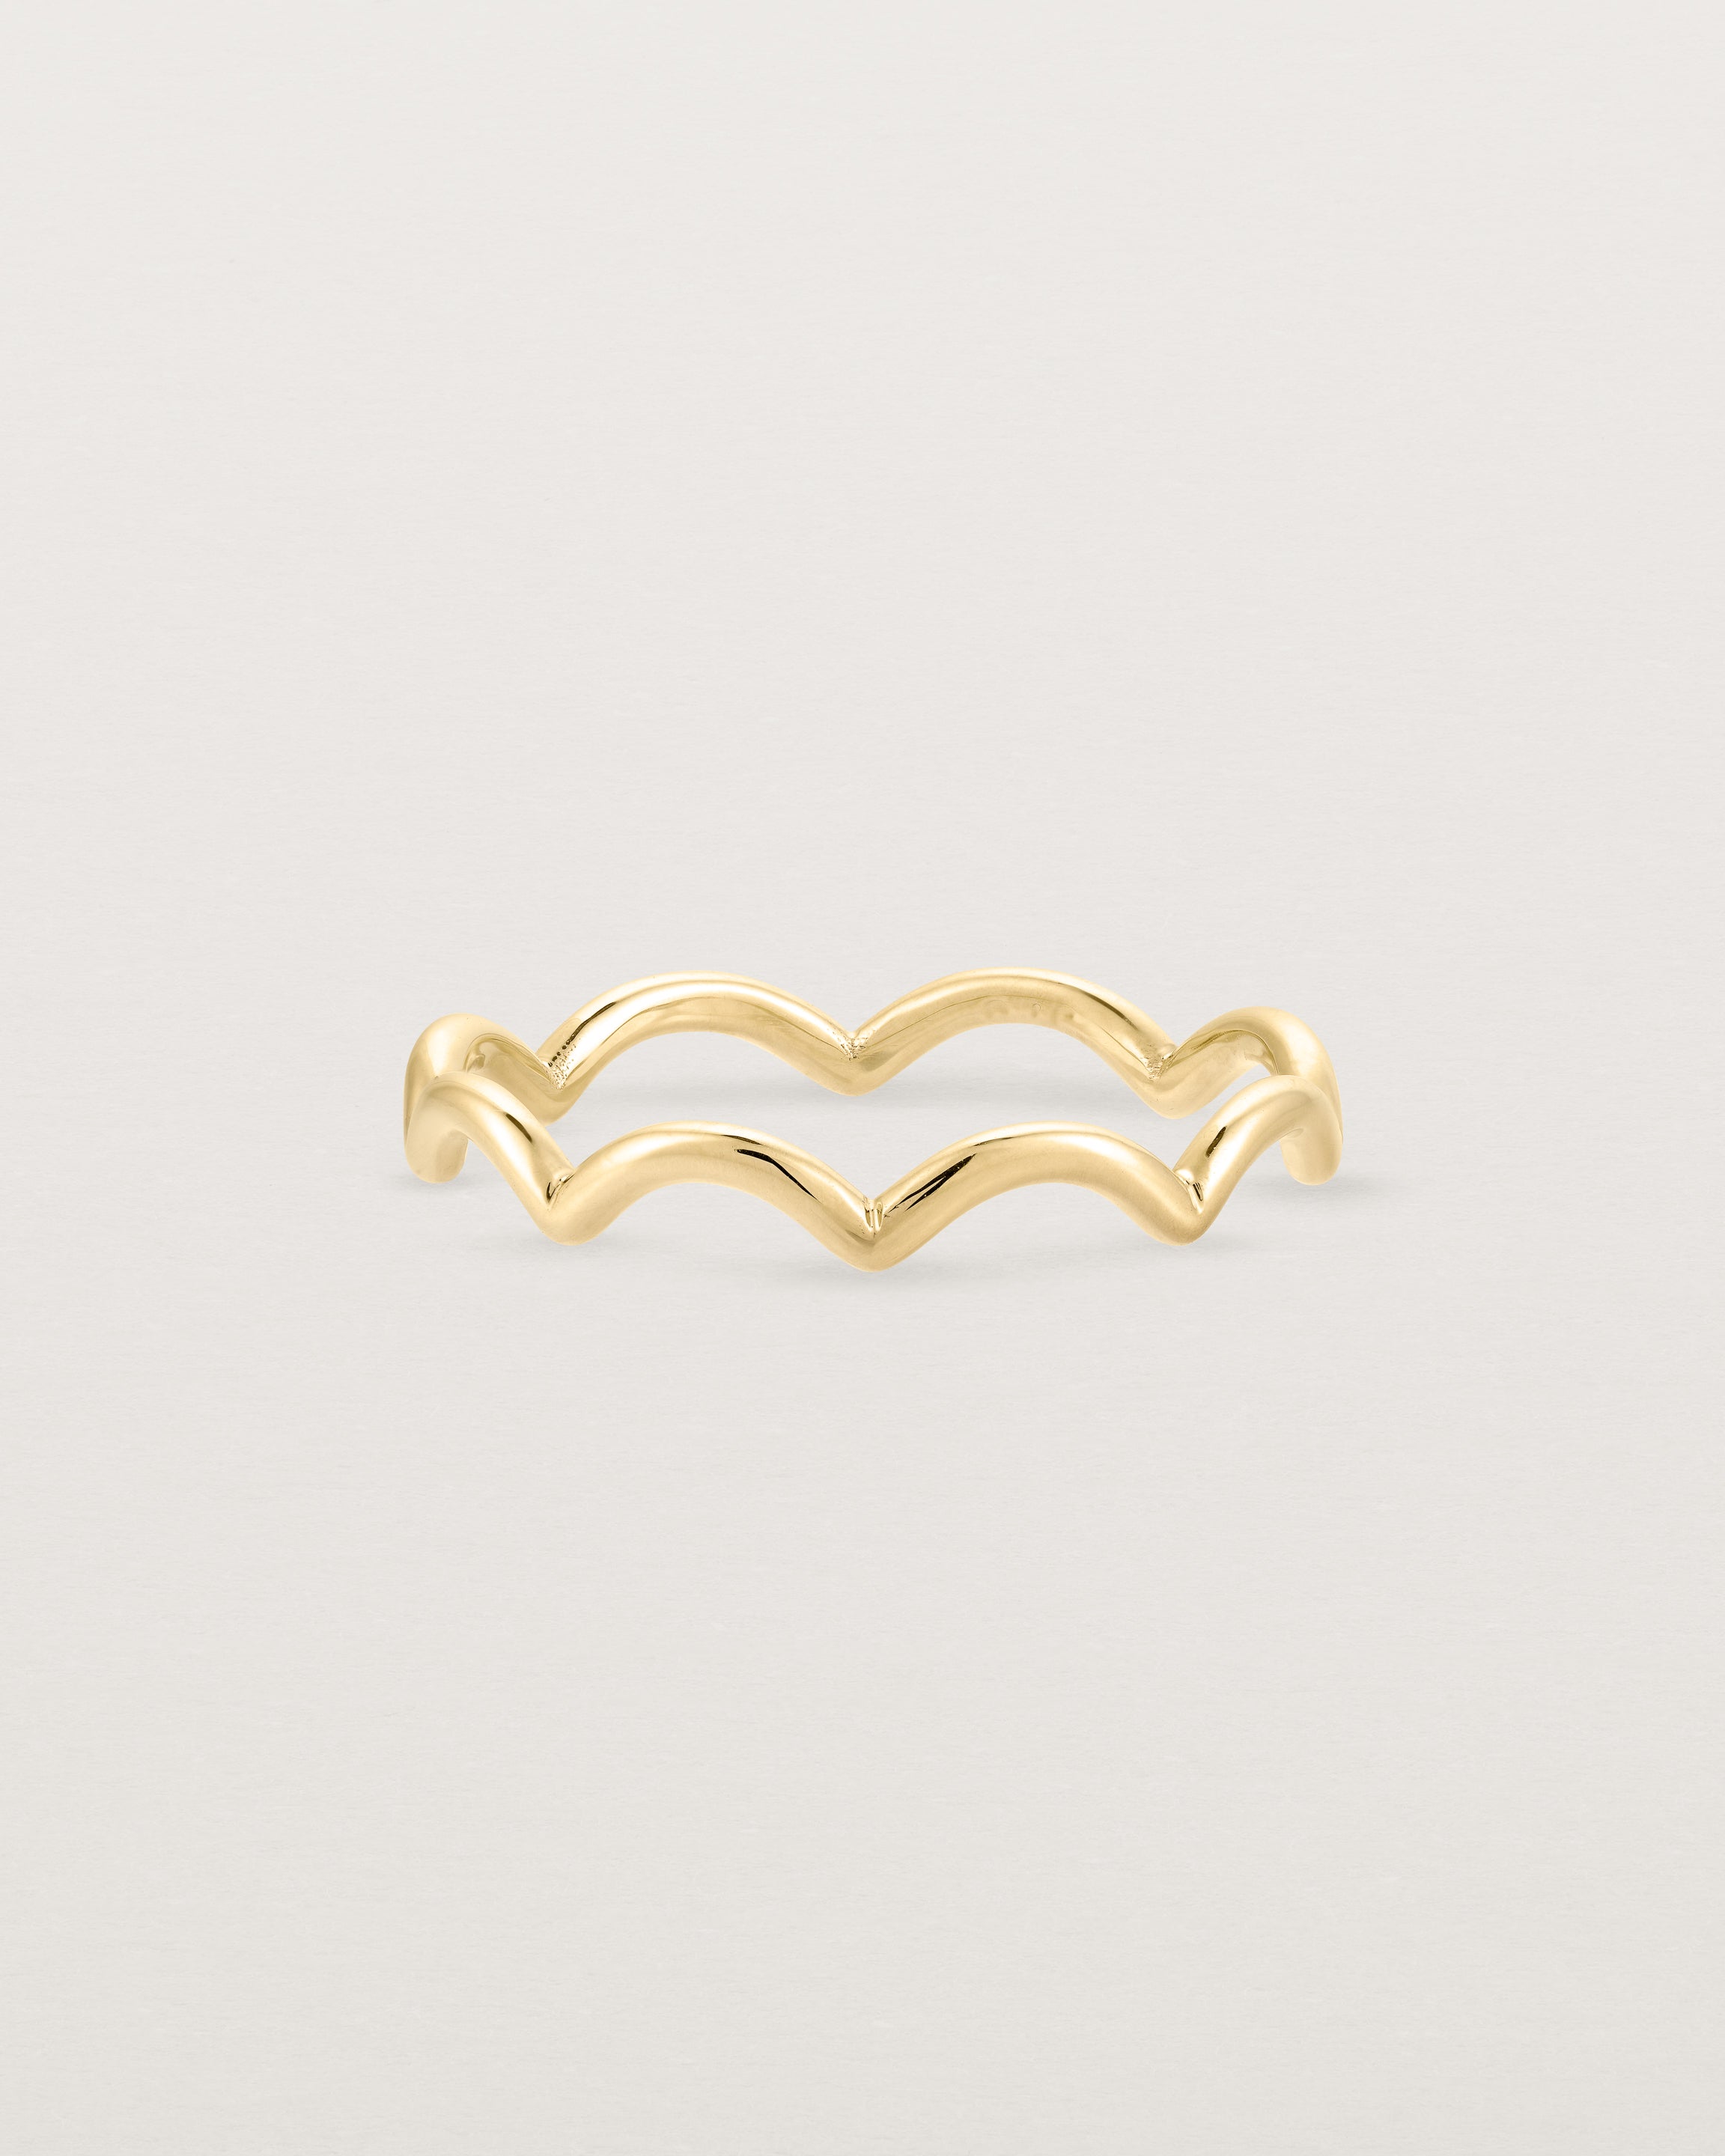 Front view of the Lai Ring in Yellow Gold.